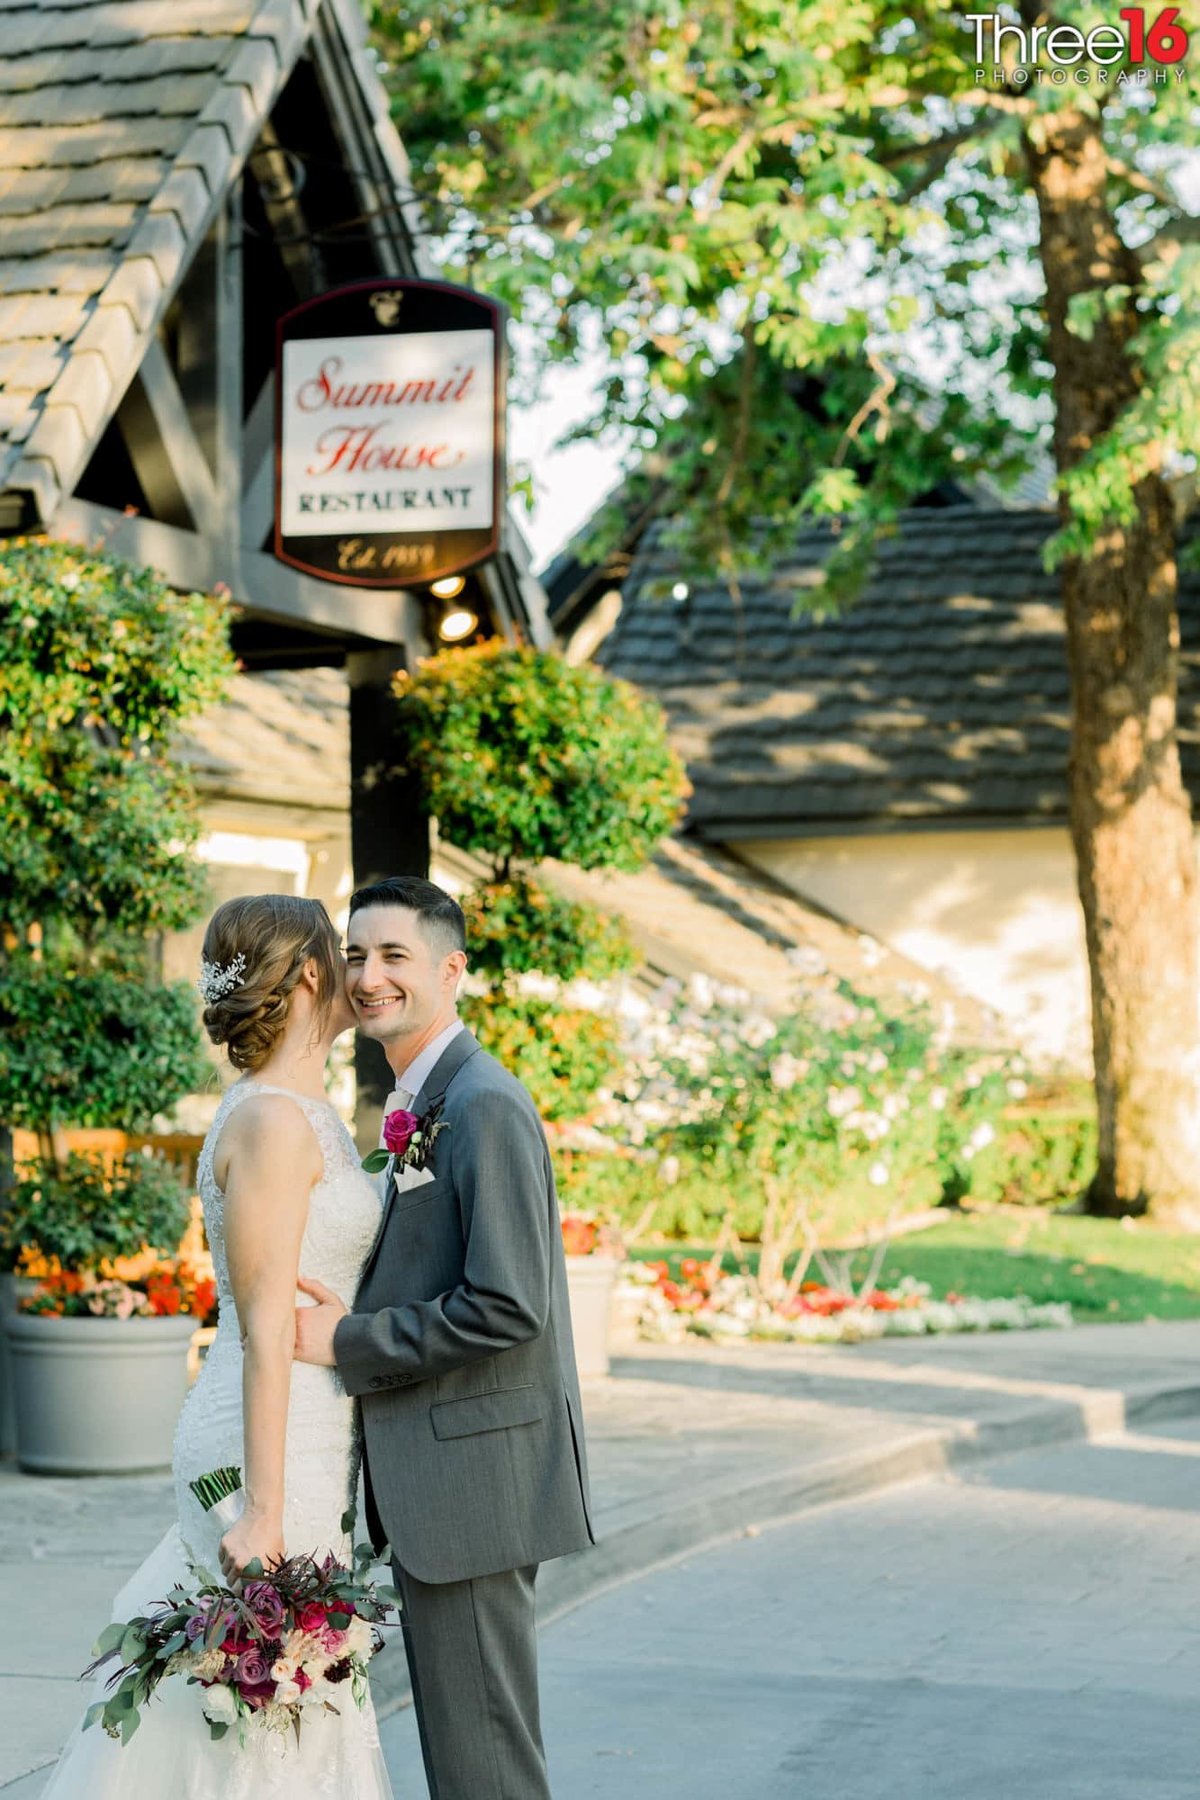 Bride and Groom embrace outside the Summit House Restaurant